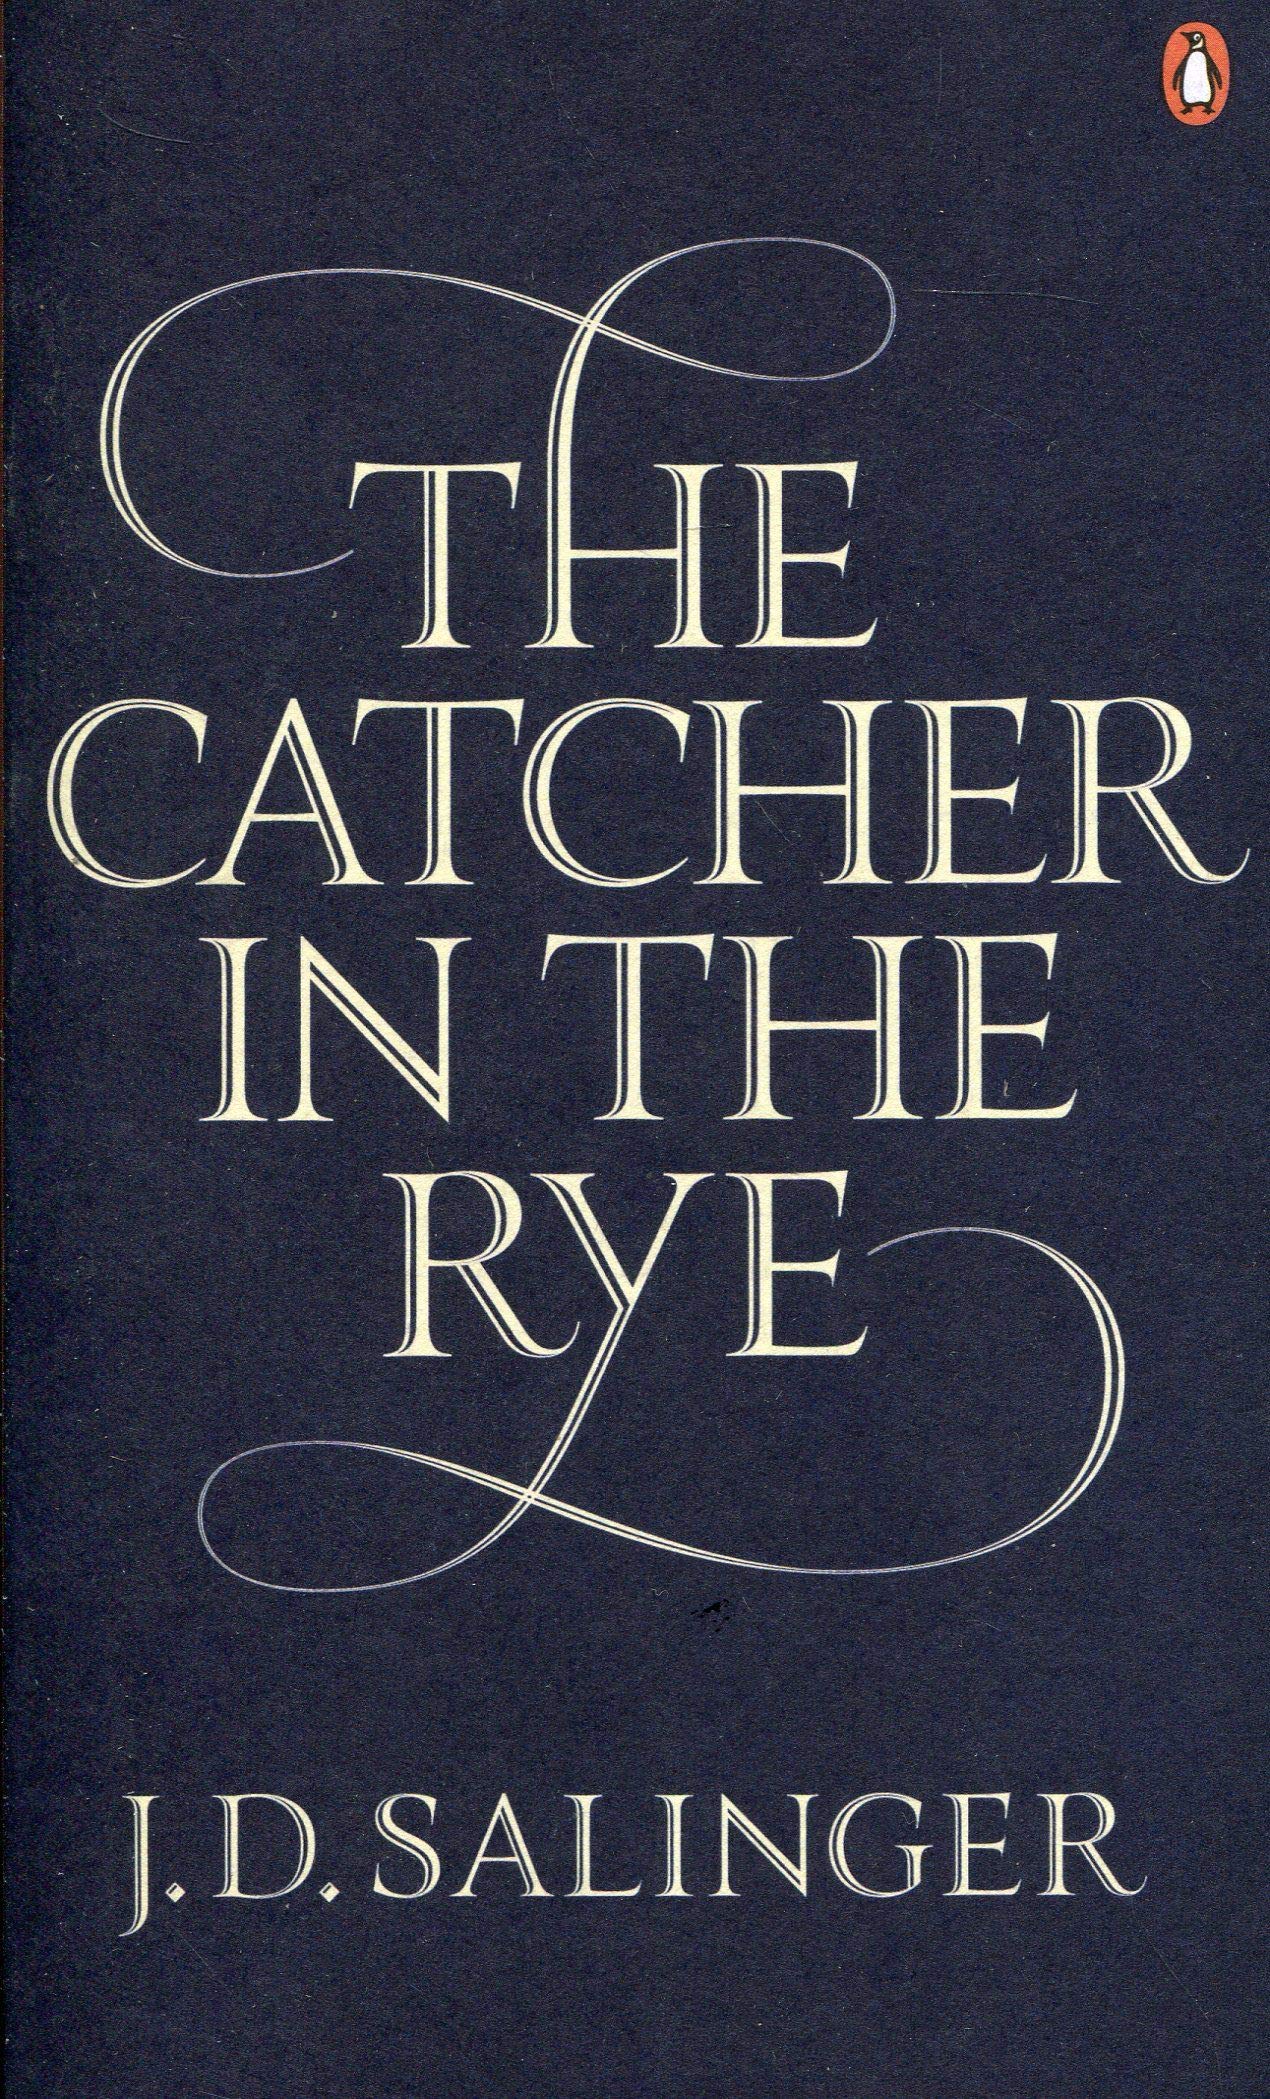 Book Review - The Catcher in the Rye by J D Salinger